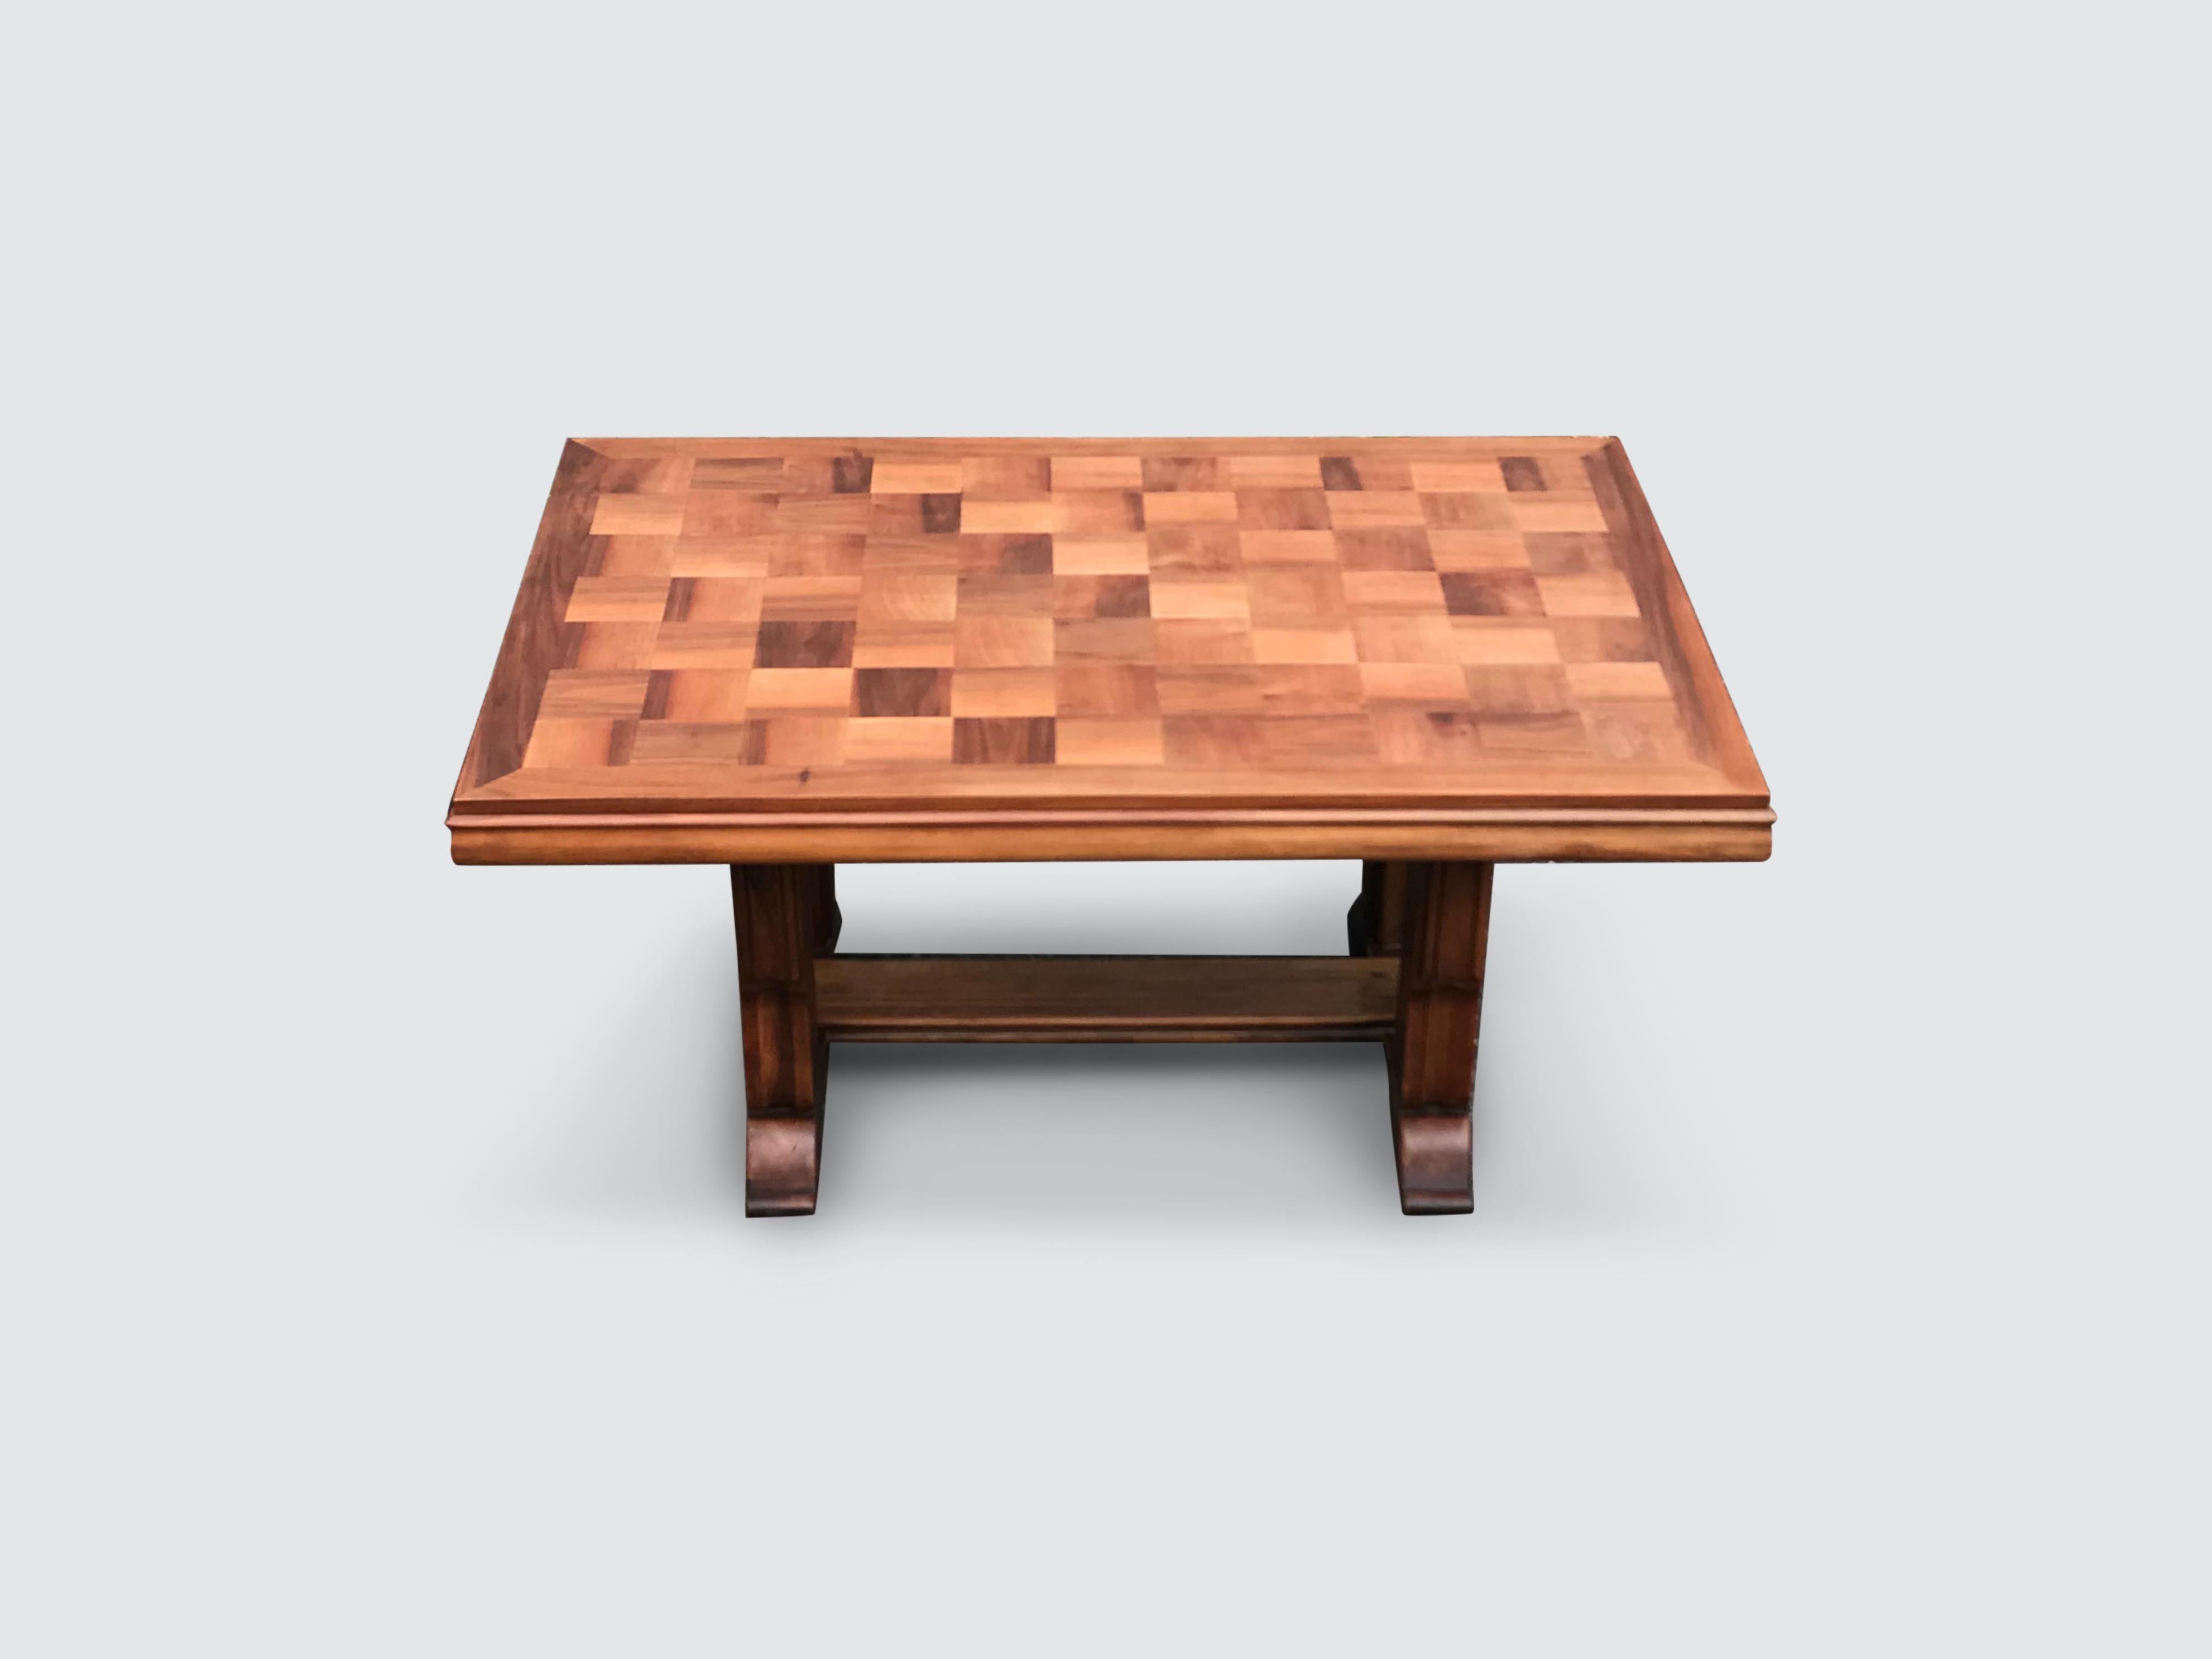 Extendable dining table attributed to Gaston Poisson in light oak and checkered board patterned top.

The dining table has been fashioned by hand in typical art-deco or art-nouveau French style with the sculpted legs, curled feet and patterned